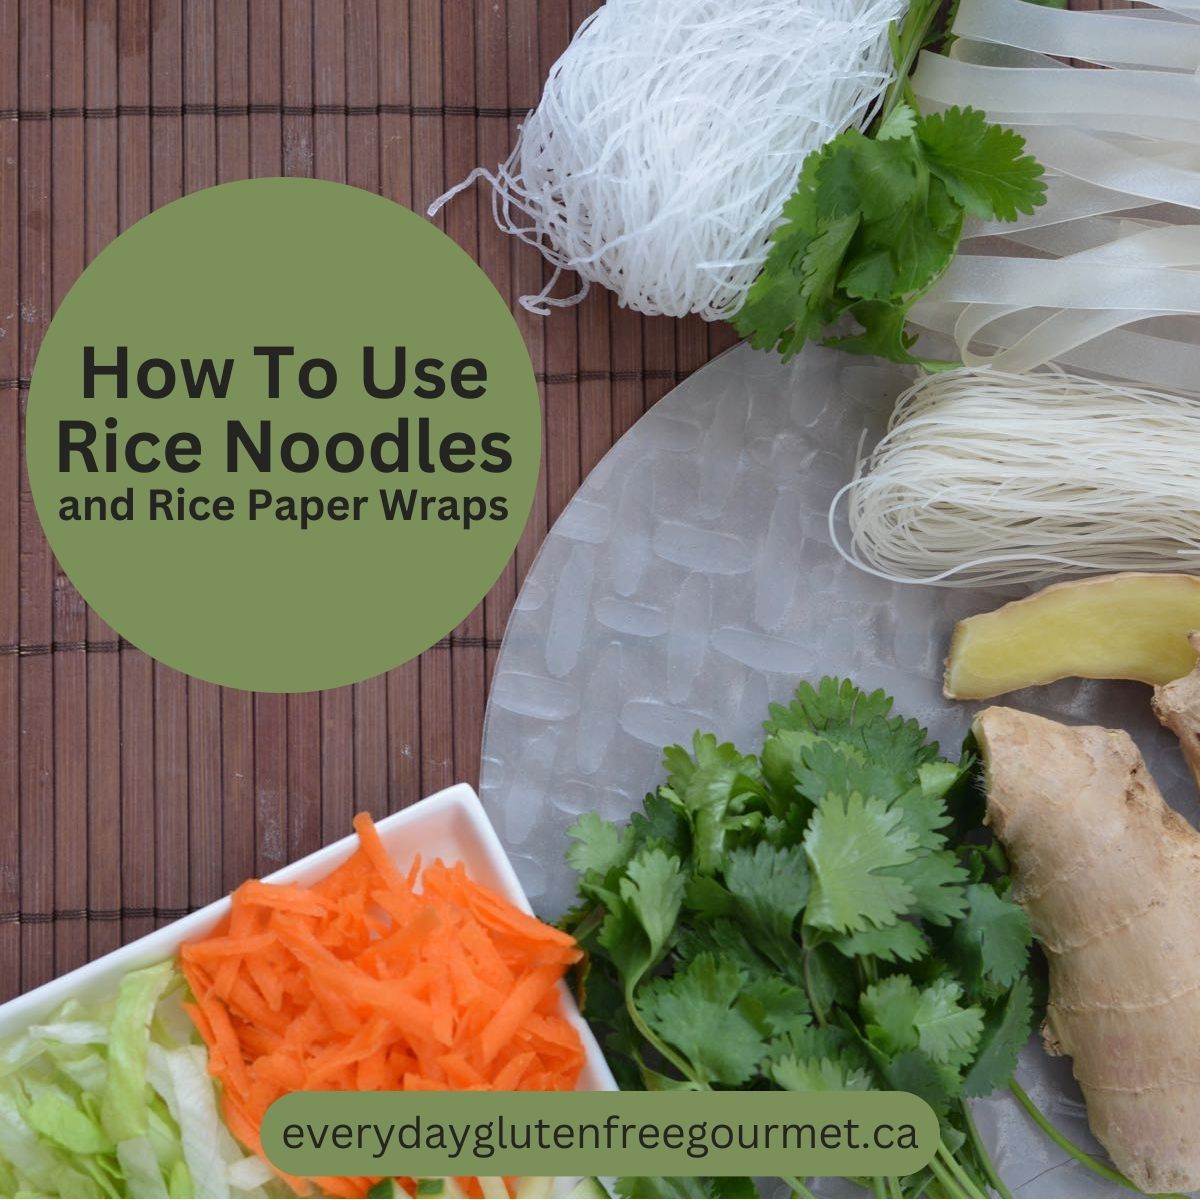 A display of wide and narrow rice noodles, rice paper wraps, ginger, cilantro and carrot.